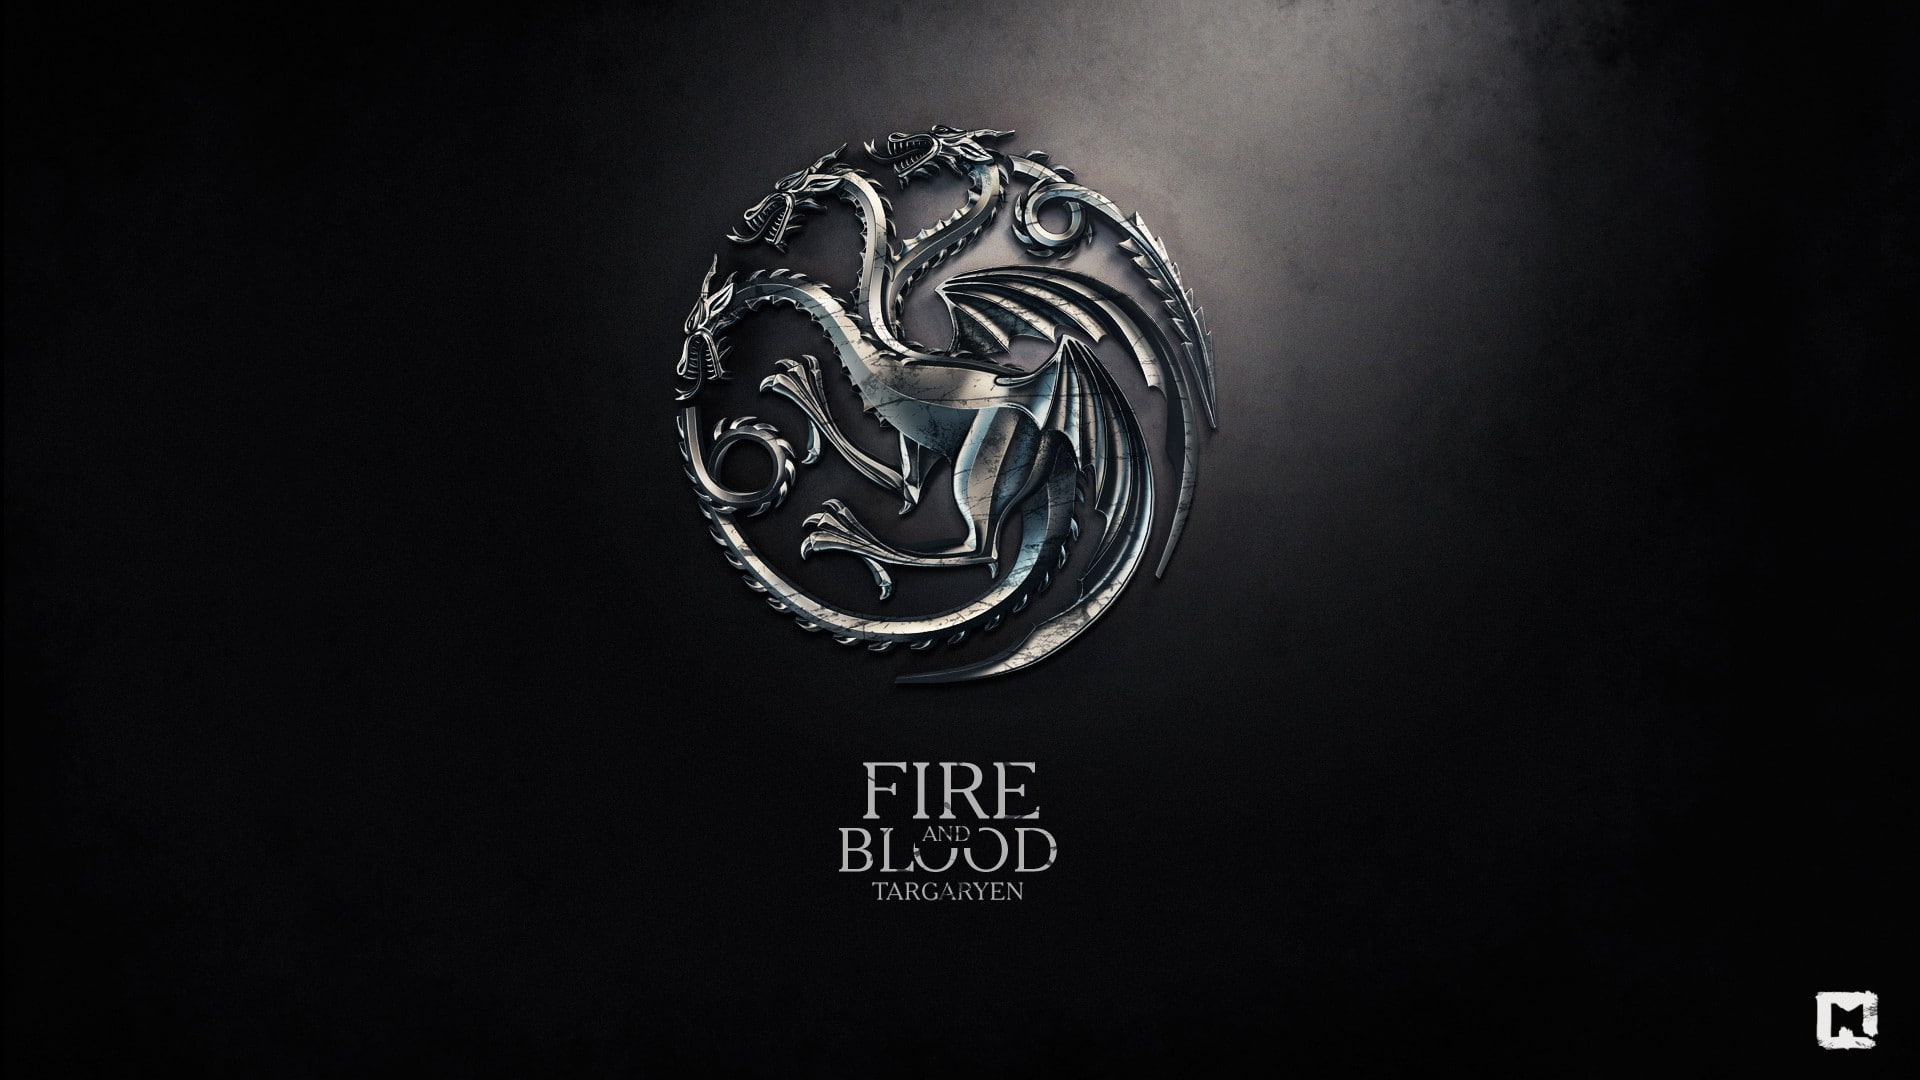 metal dragon logo anime digital art game of thrones a song of ice and fire fire sigils house targaryen fire and blood